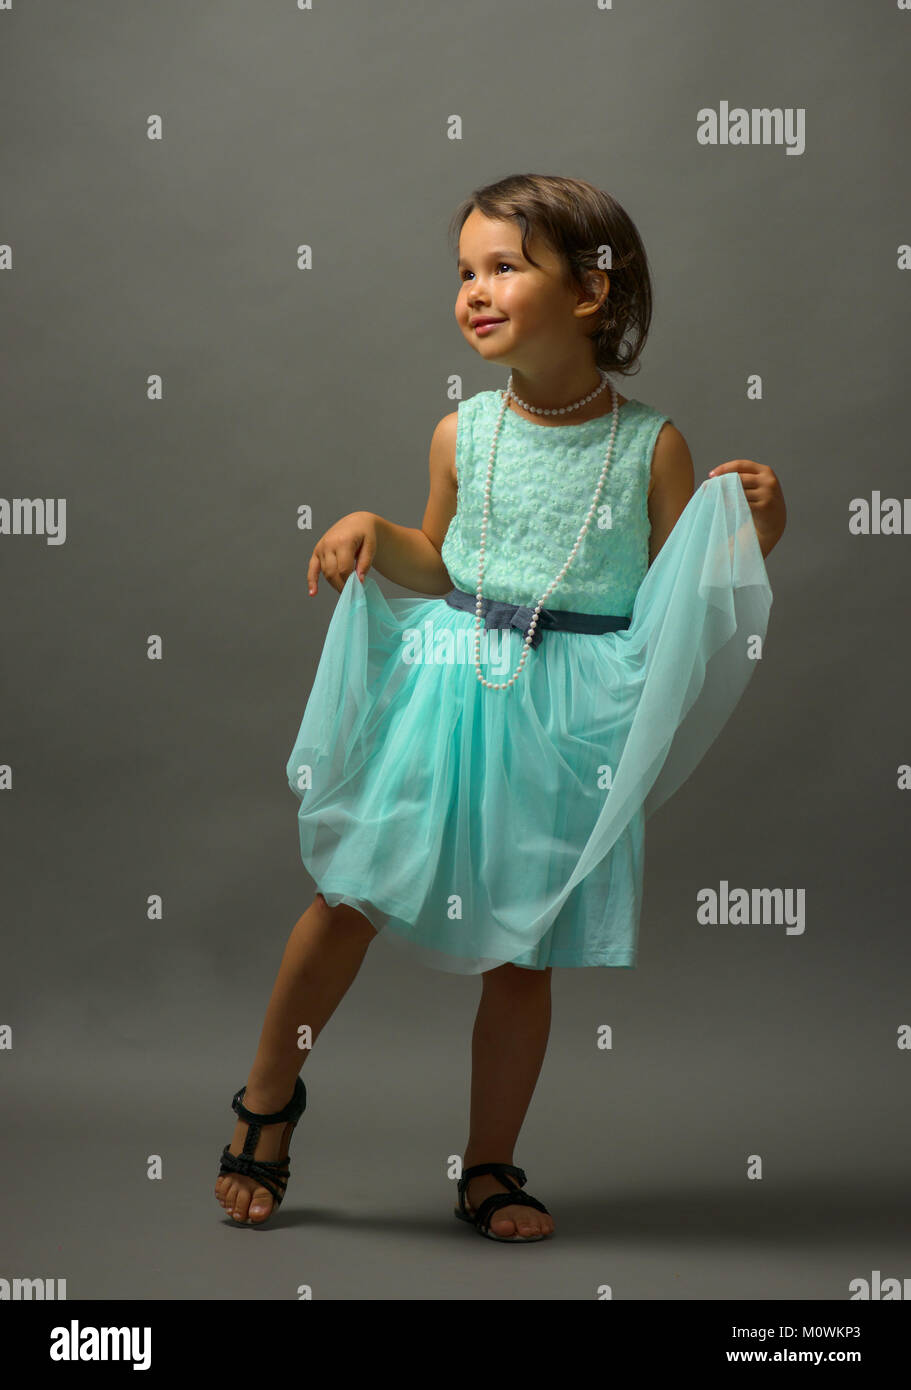 Little cute girl dancing  on gray background Stock Photo